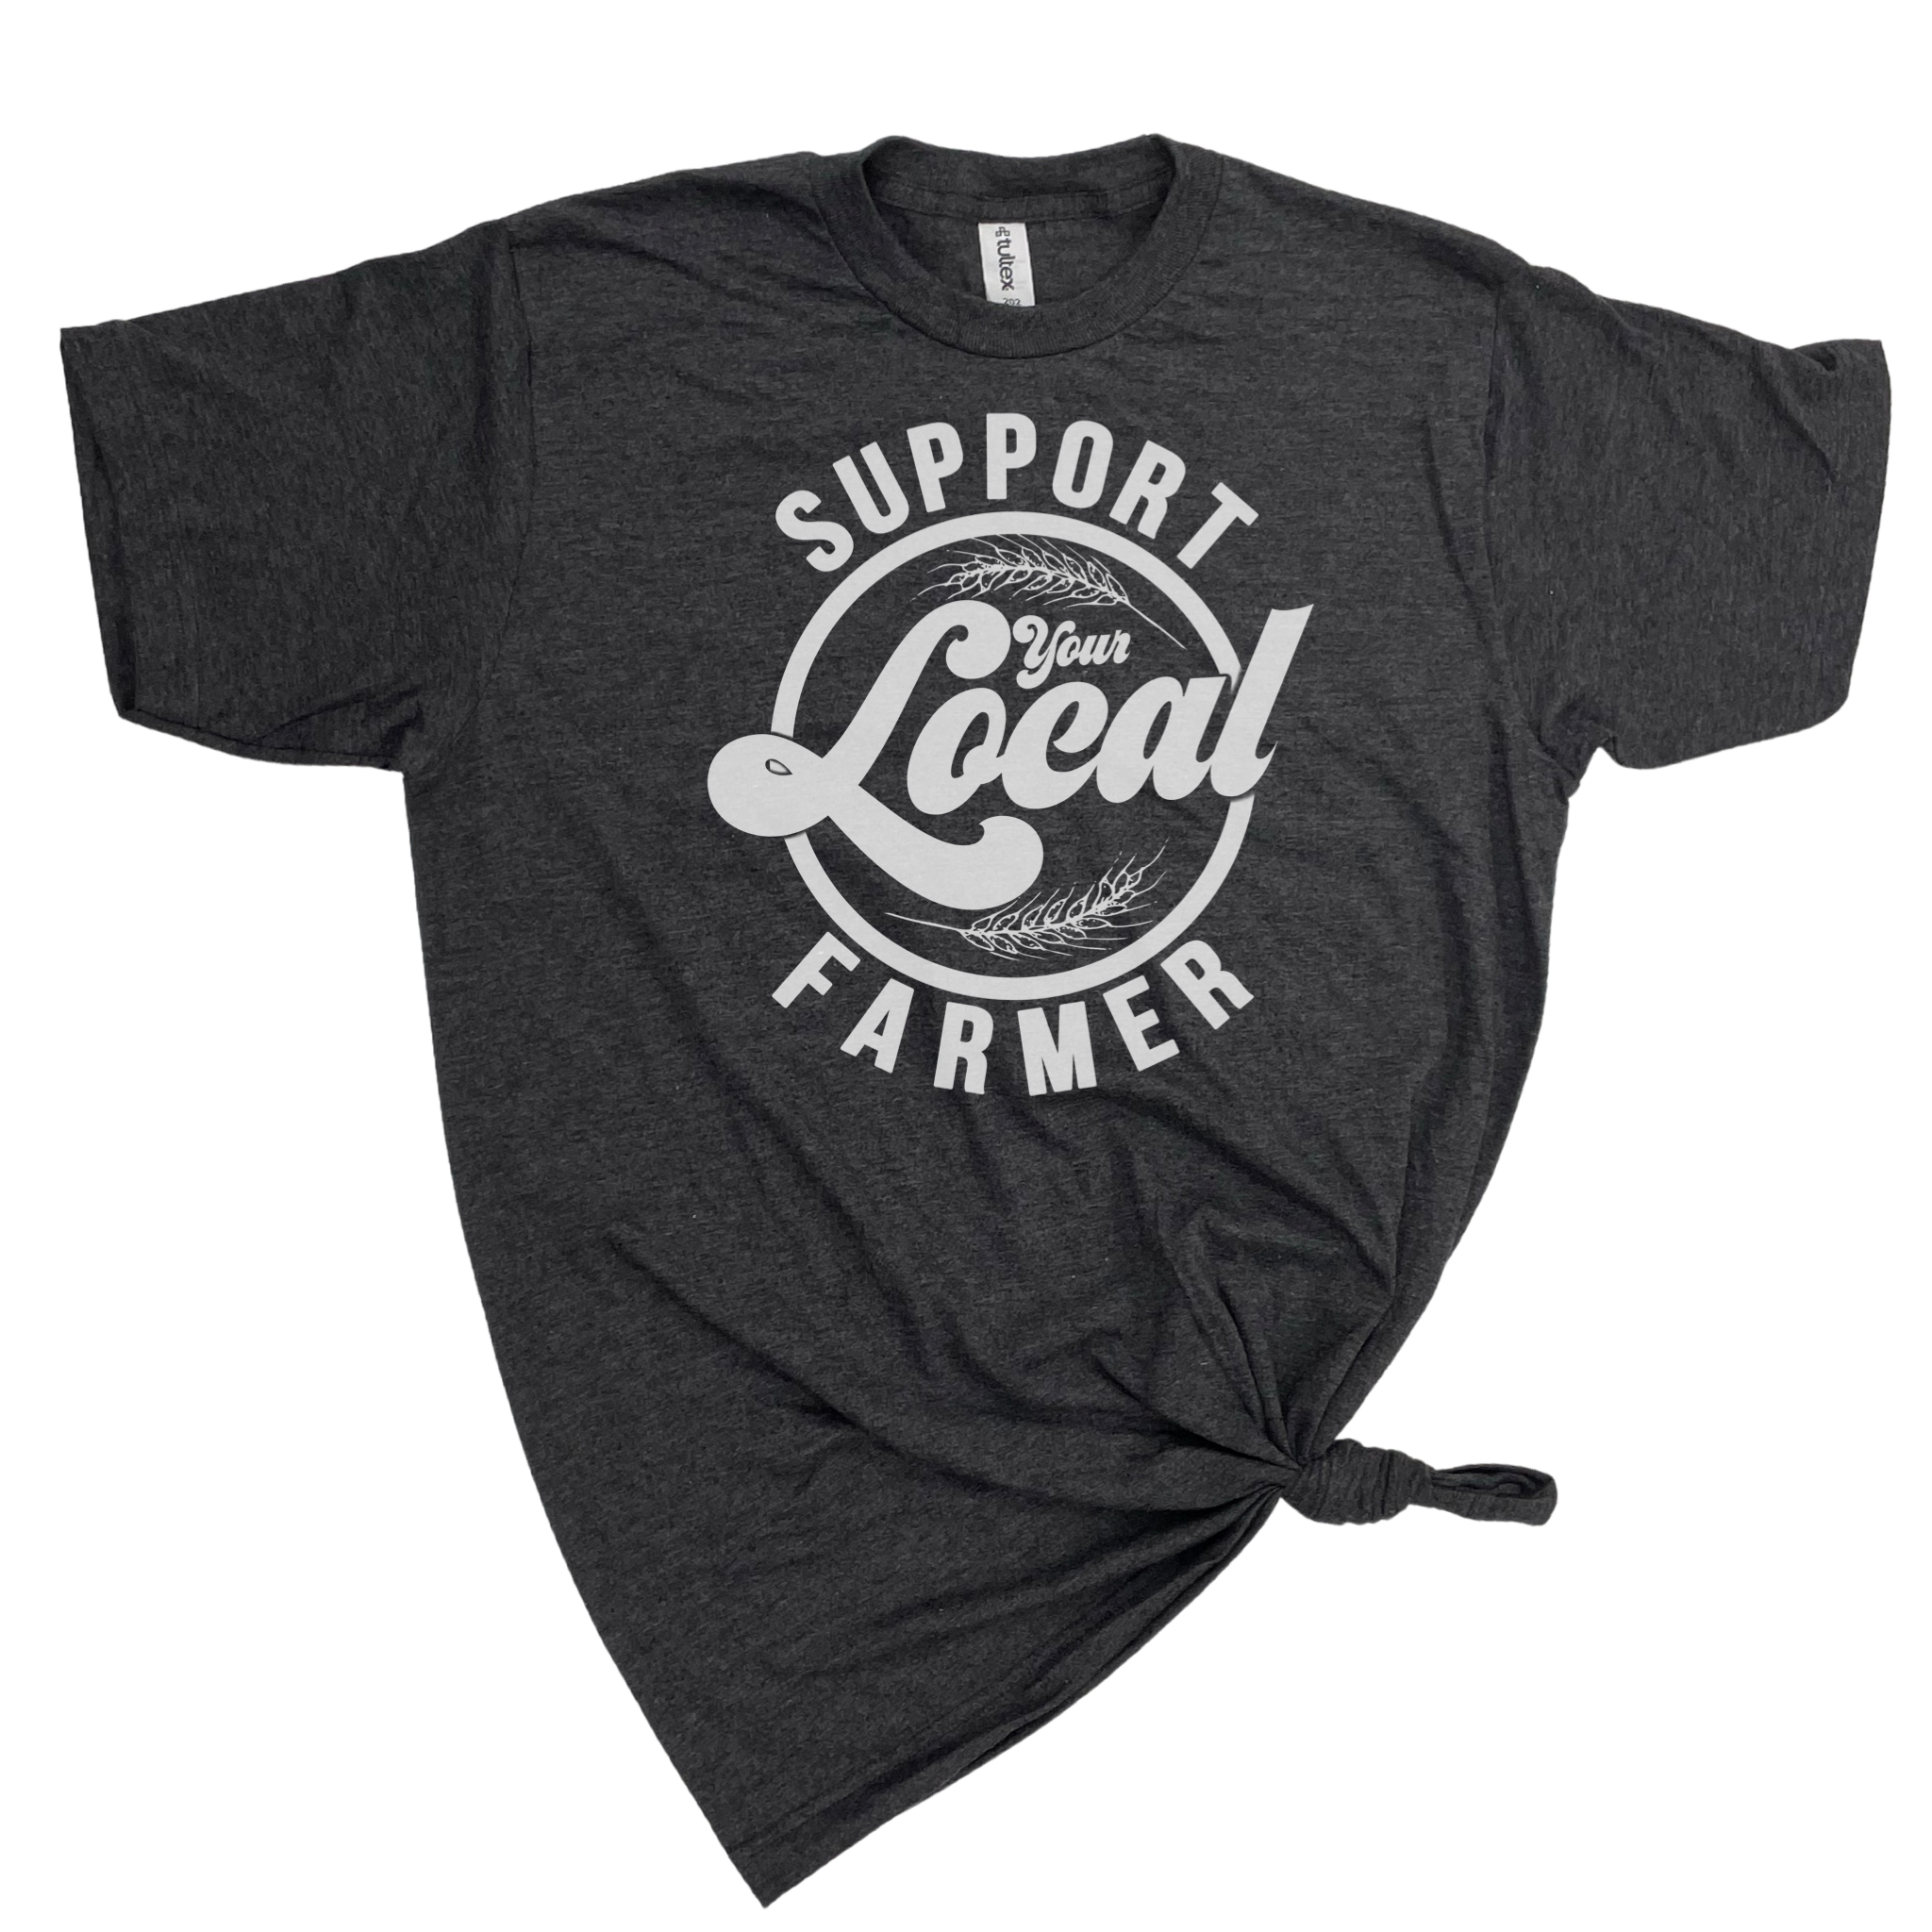 SUPPORT YOUR LOCAL FARMER T-SHIRT